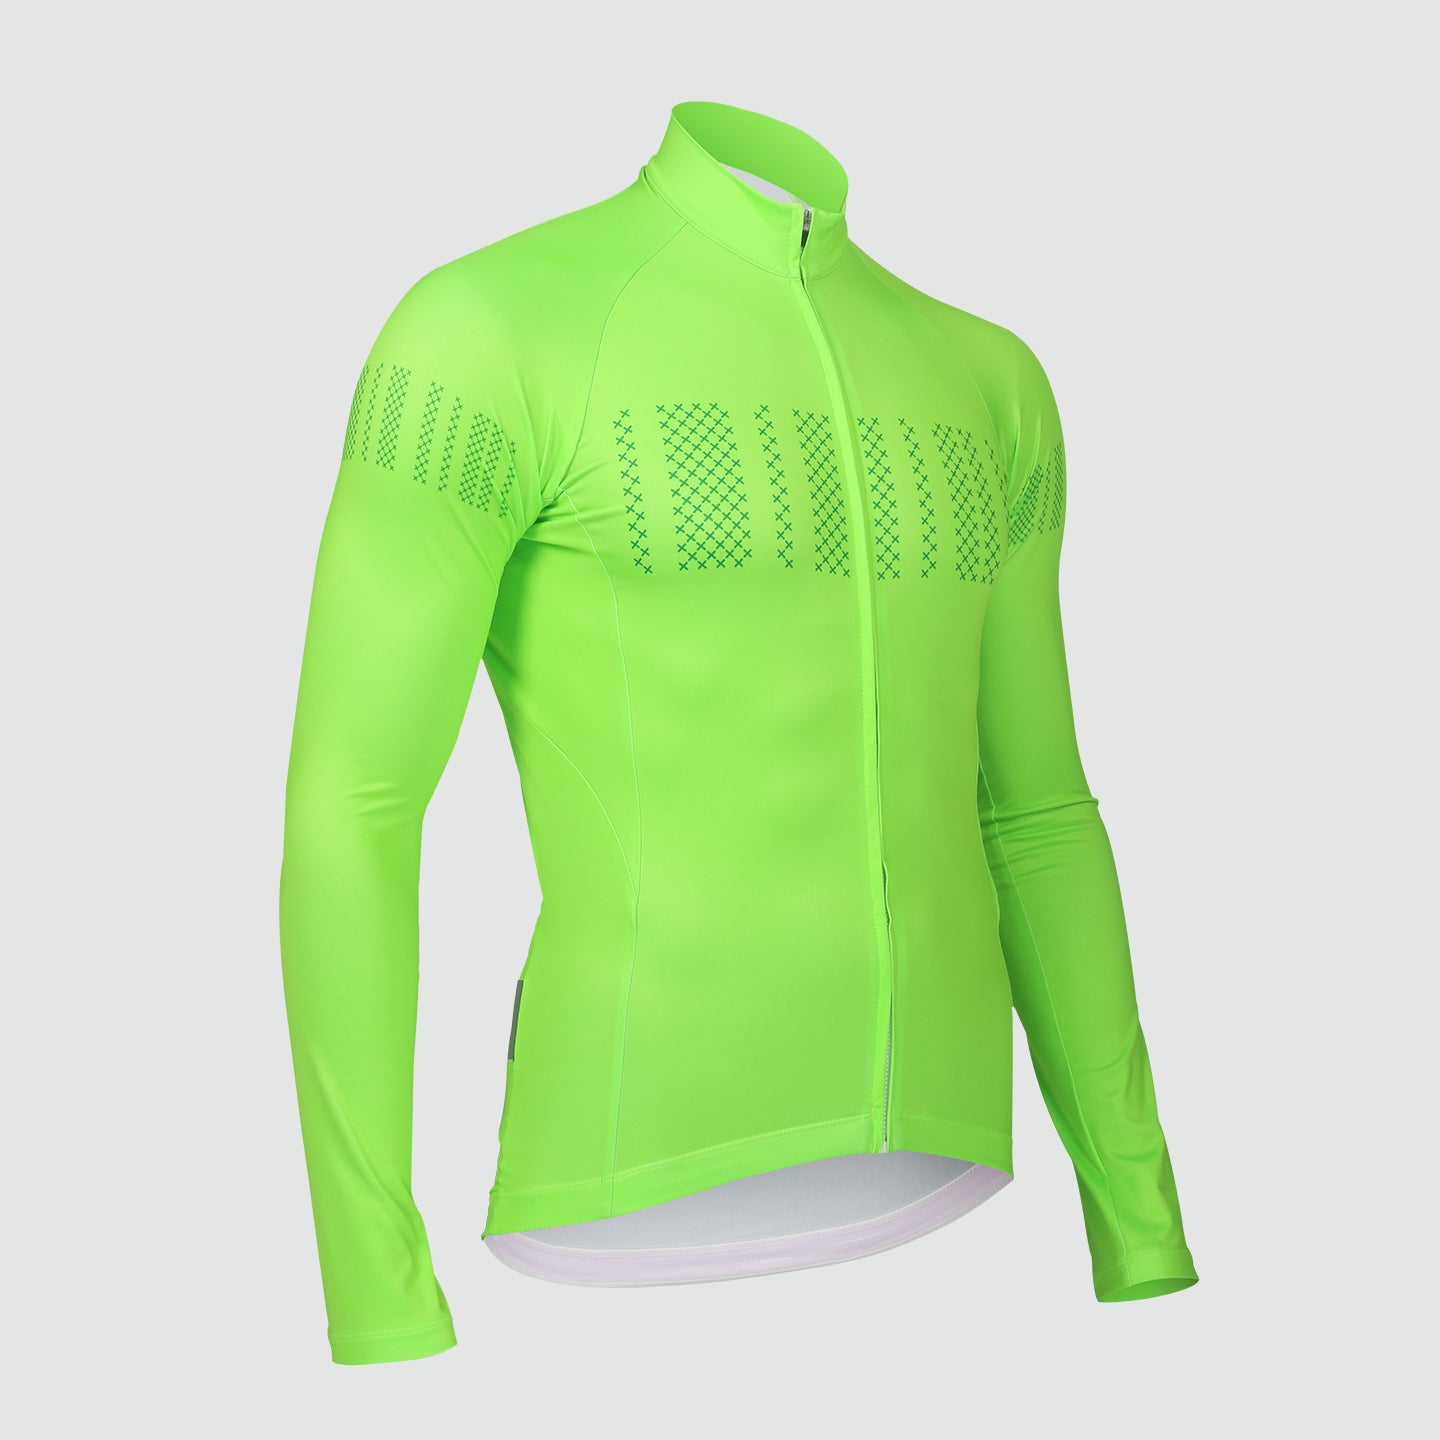 BEHOT FIT THERMAL LONG SLEEVE CYCLING JERSEY